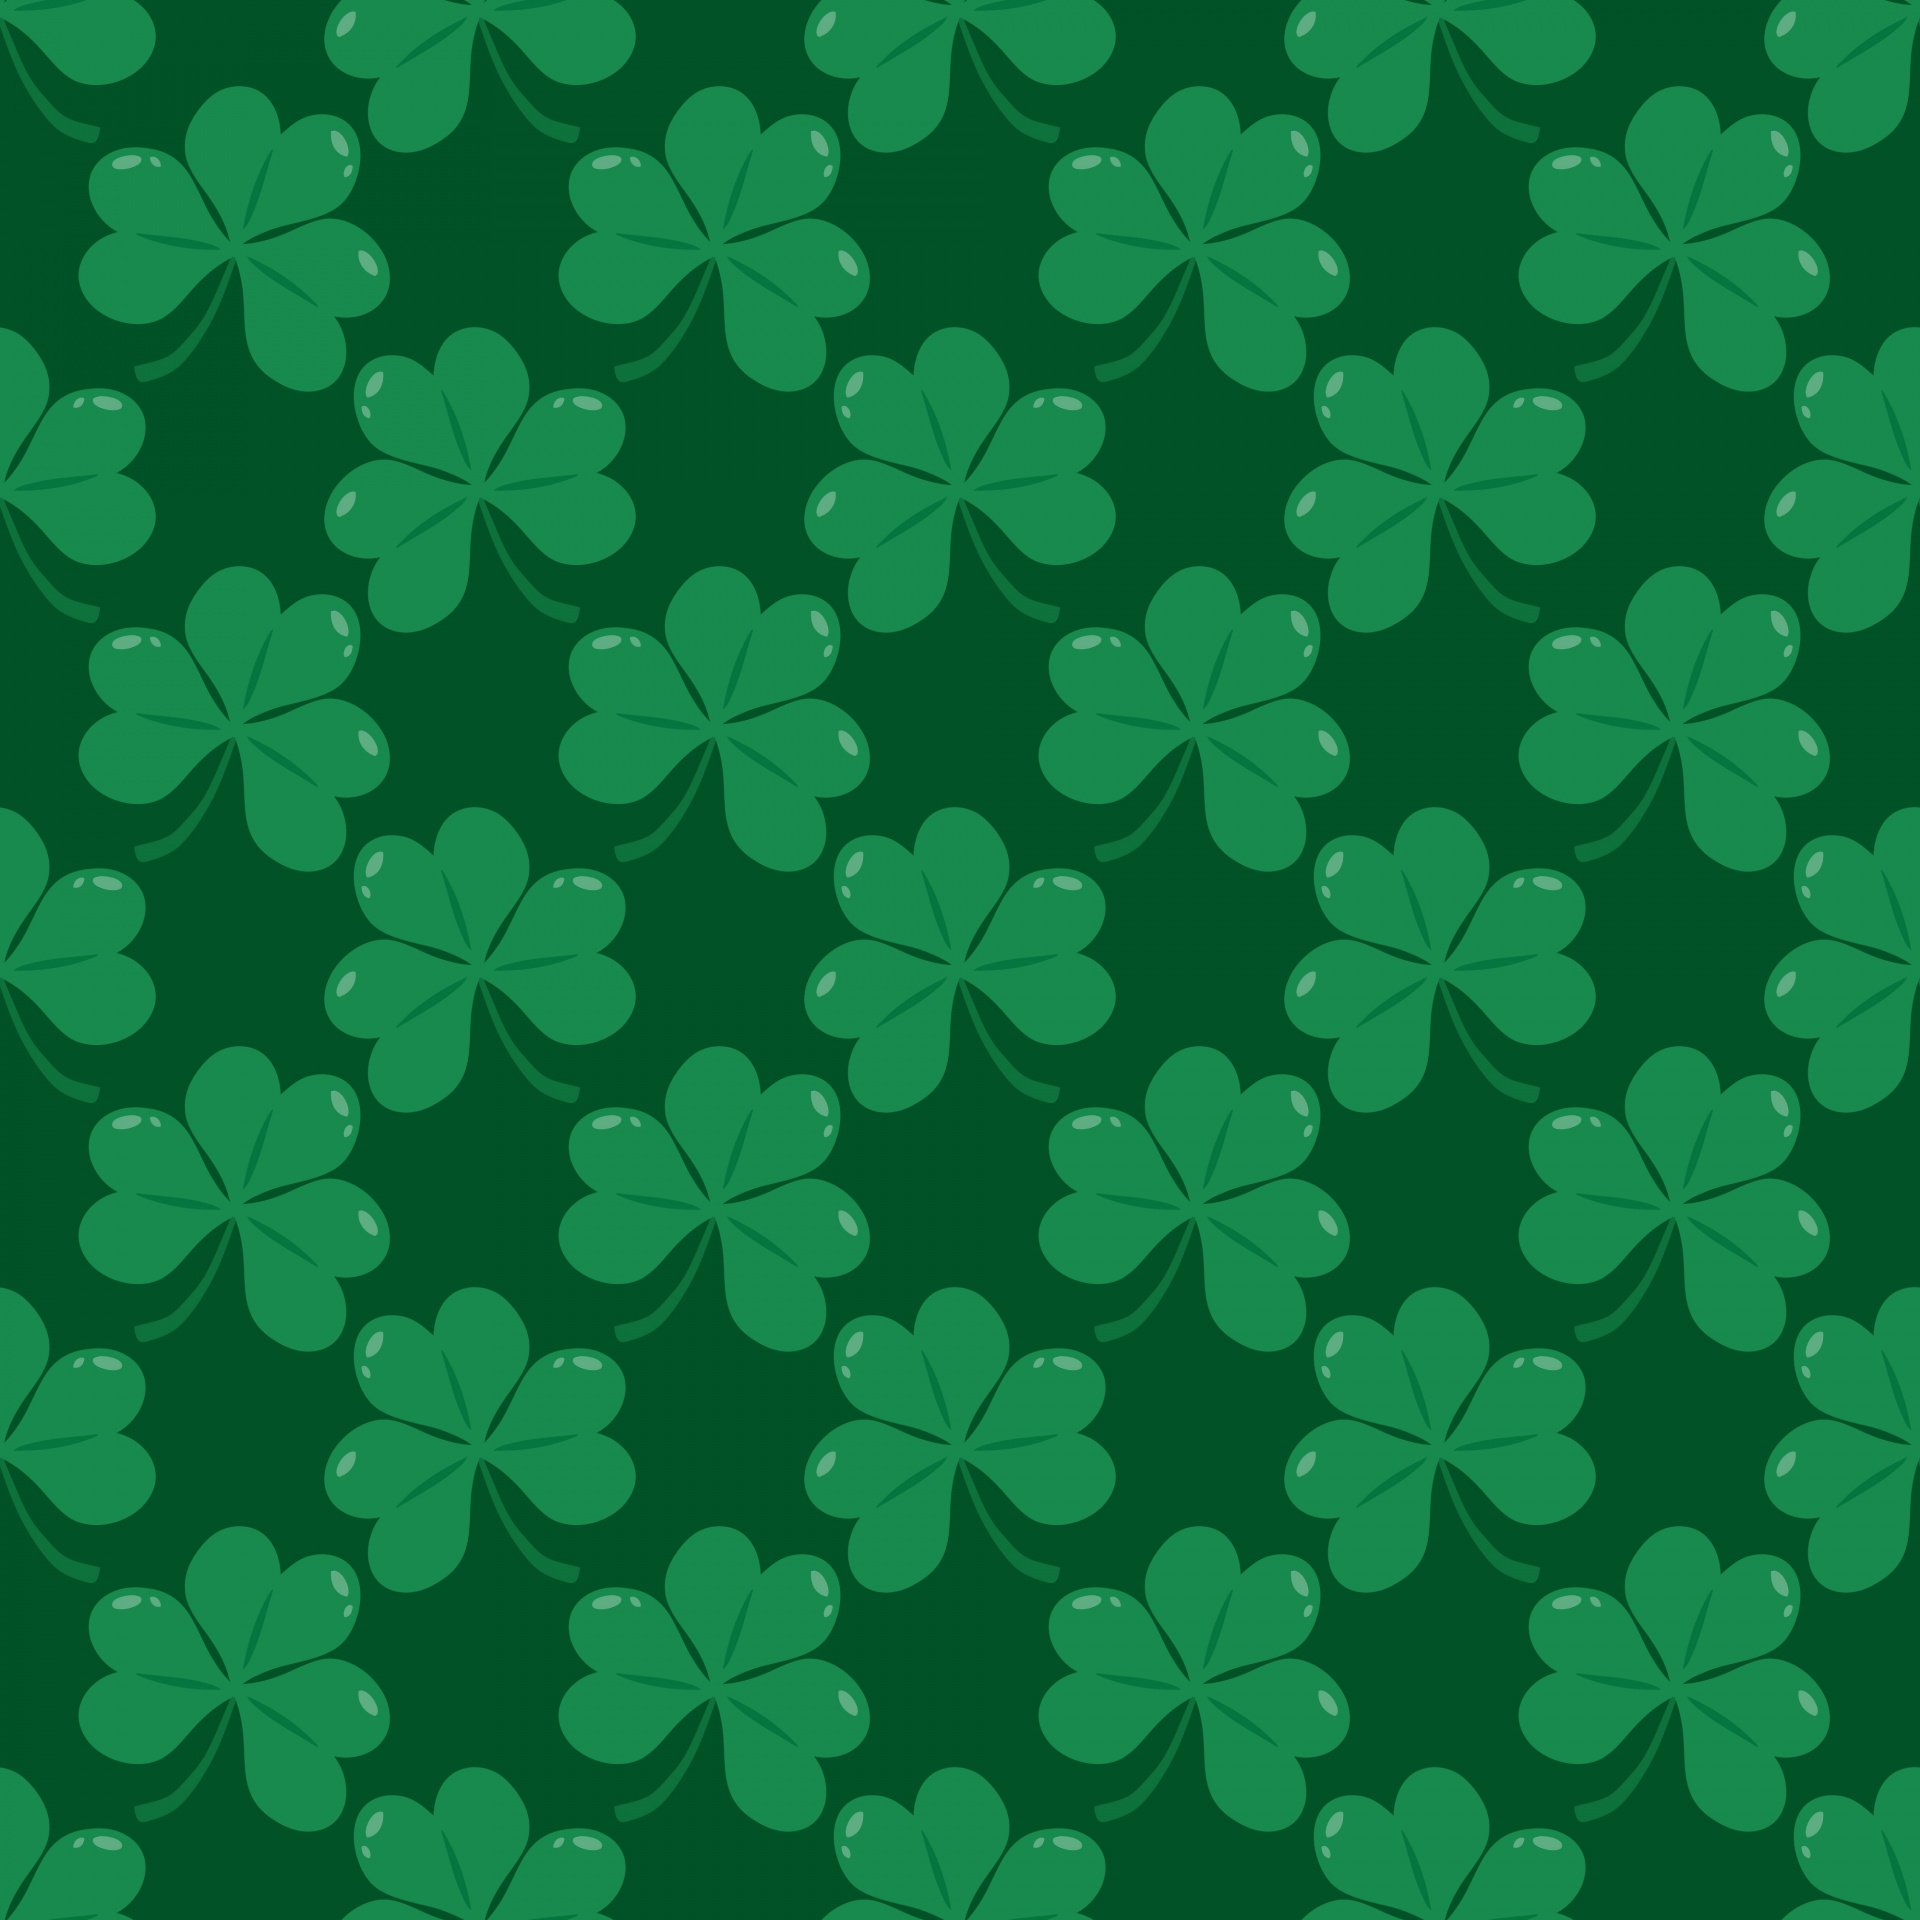 Shamrock wallpaper pattern seamless background ideal for st patrick's day